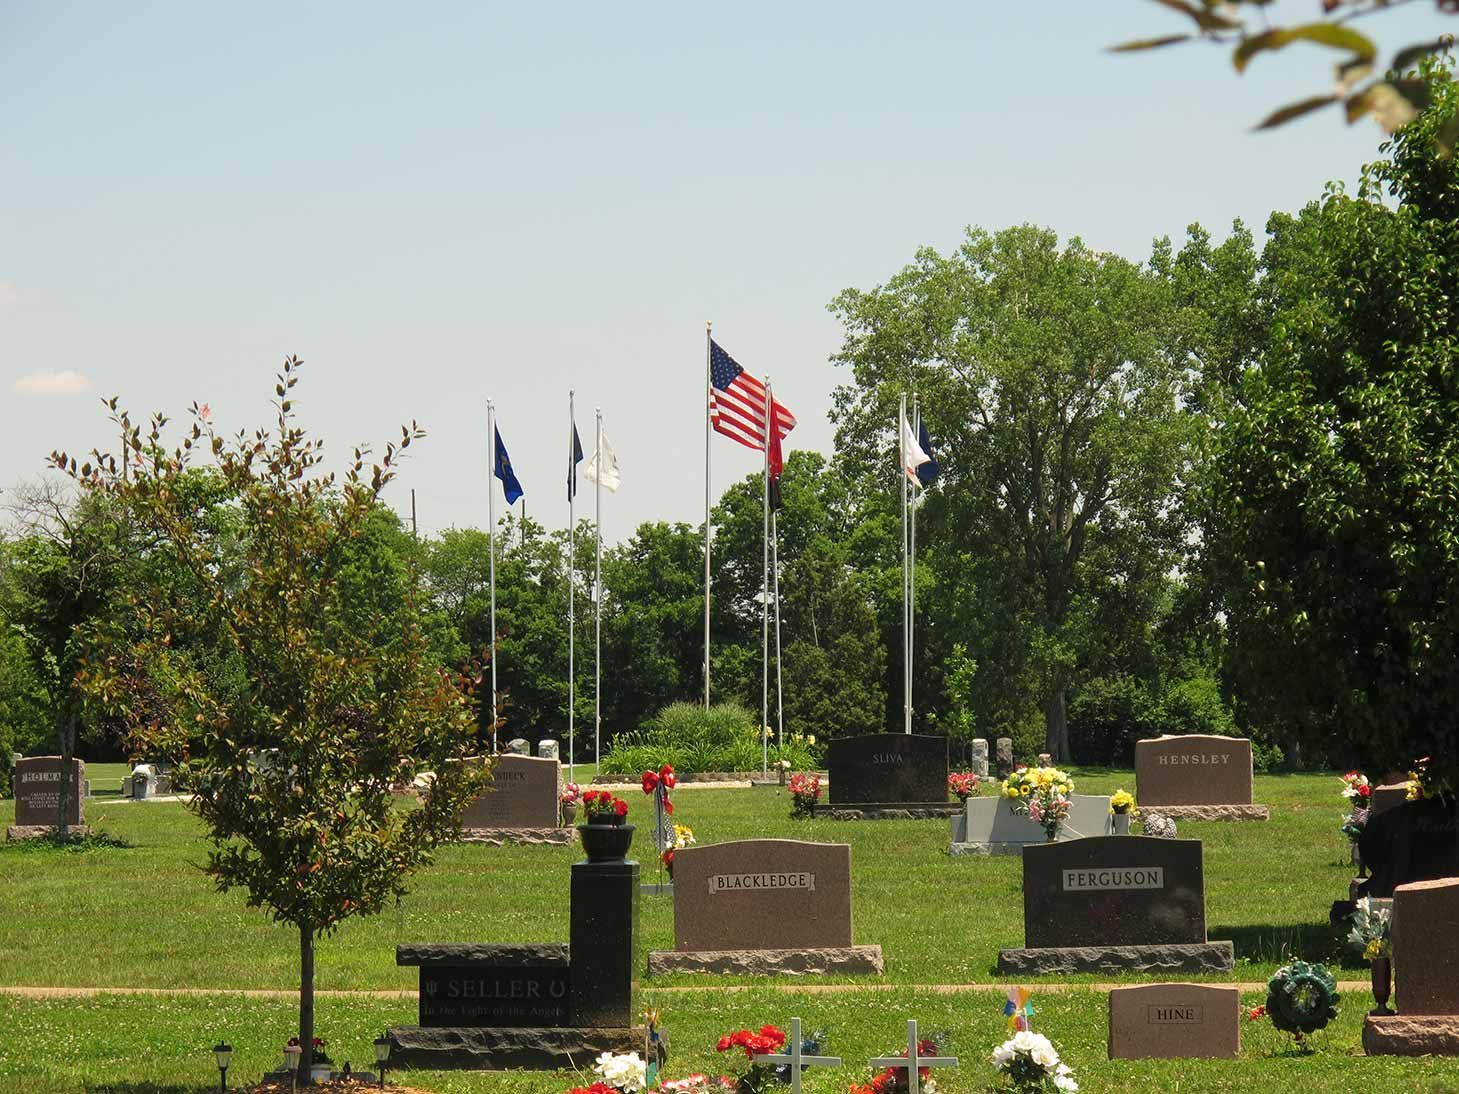 West Ridge Park Cemetery and Flags